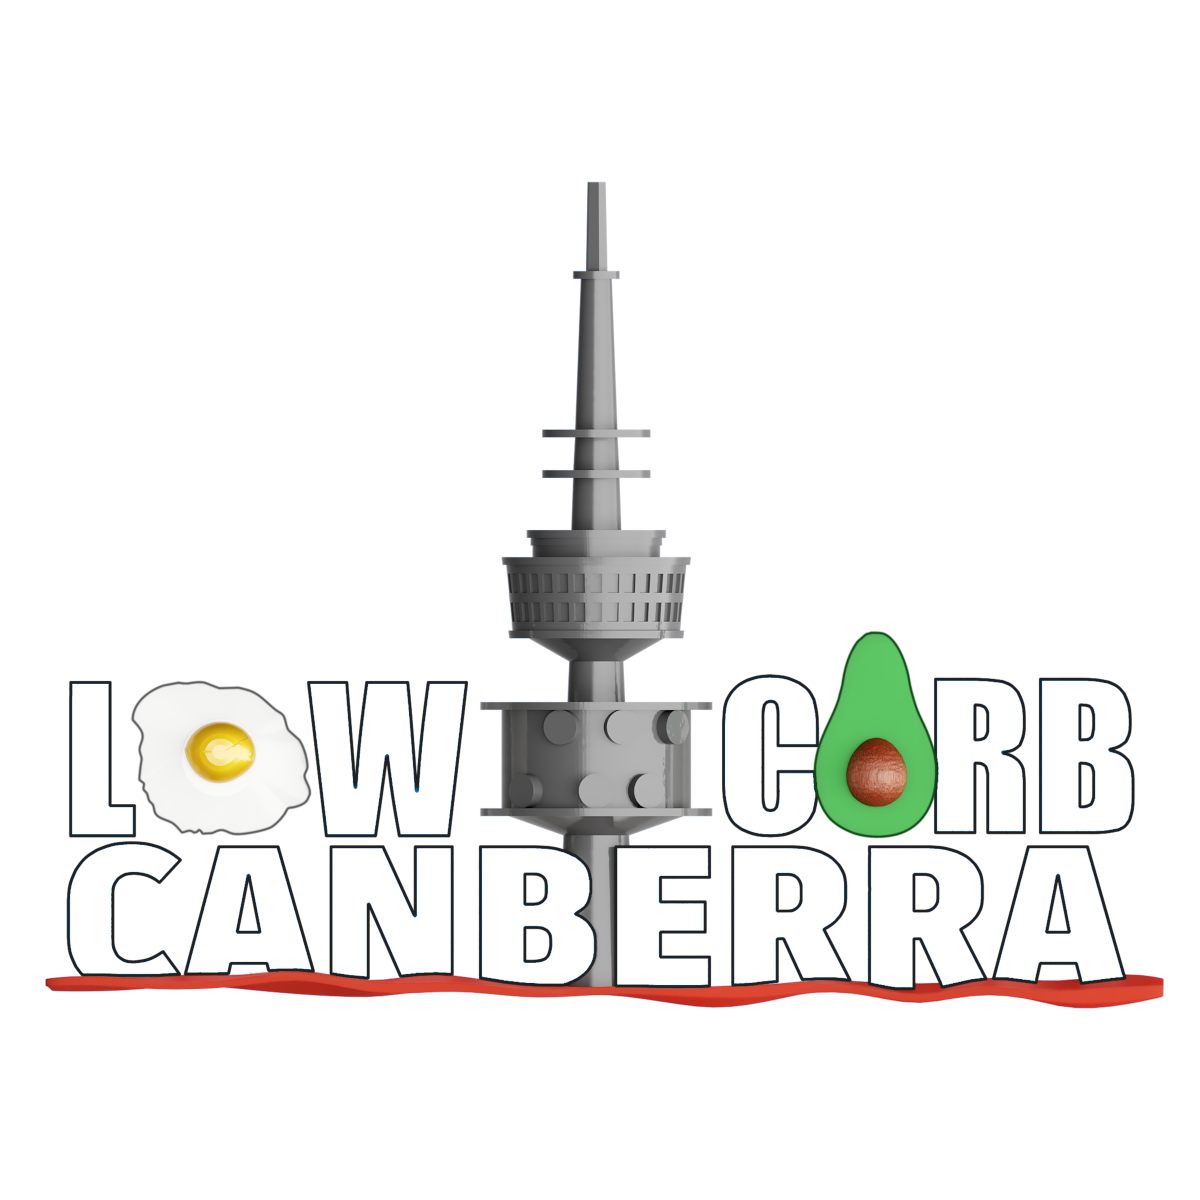 Low Carb Canberra logo